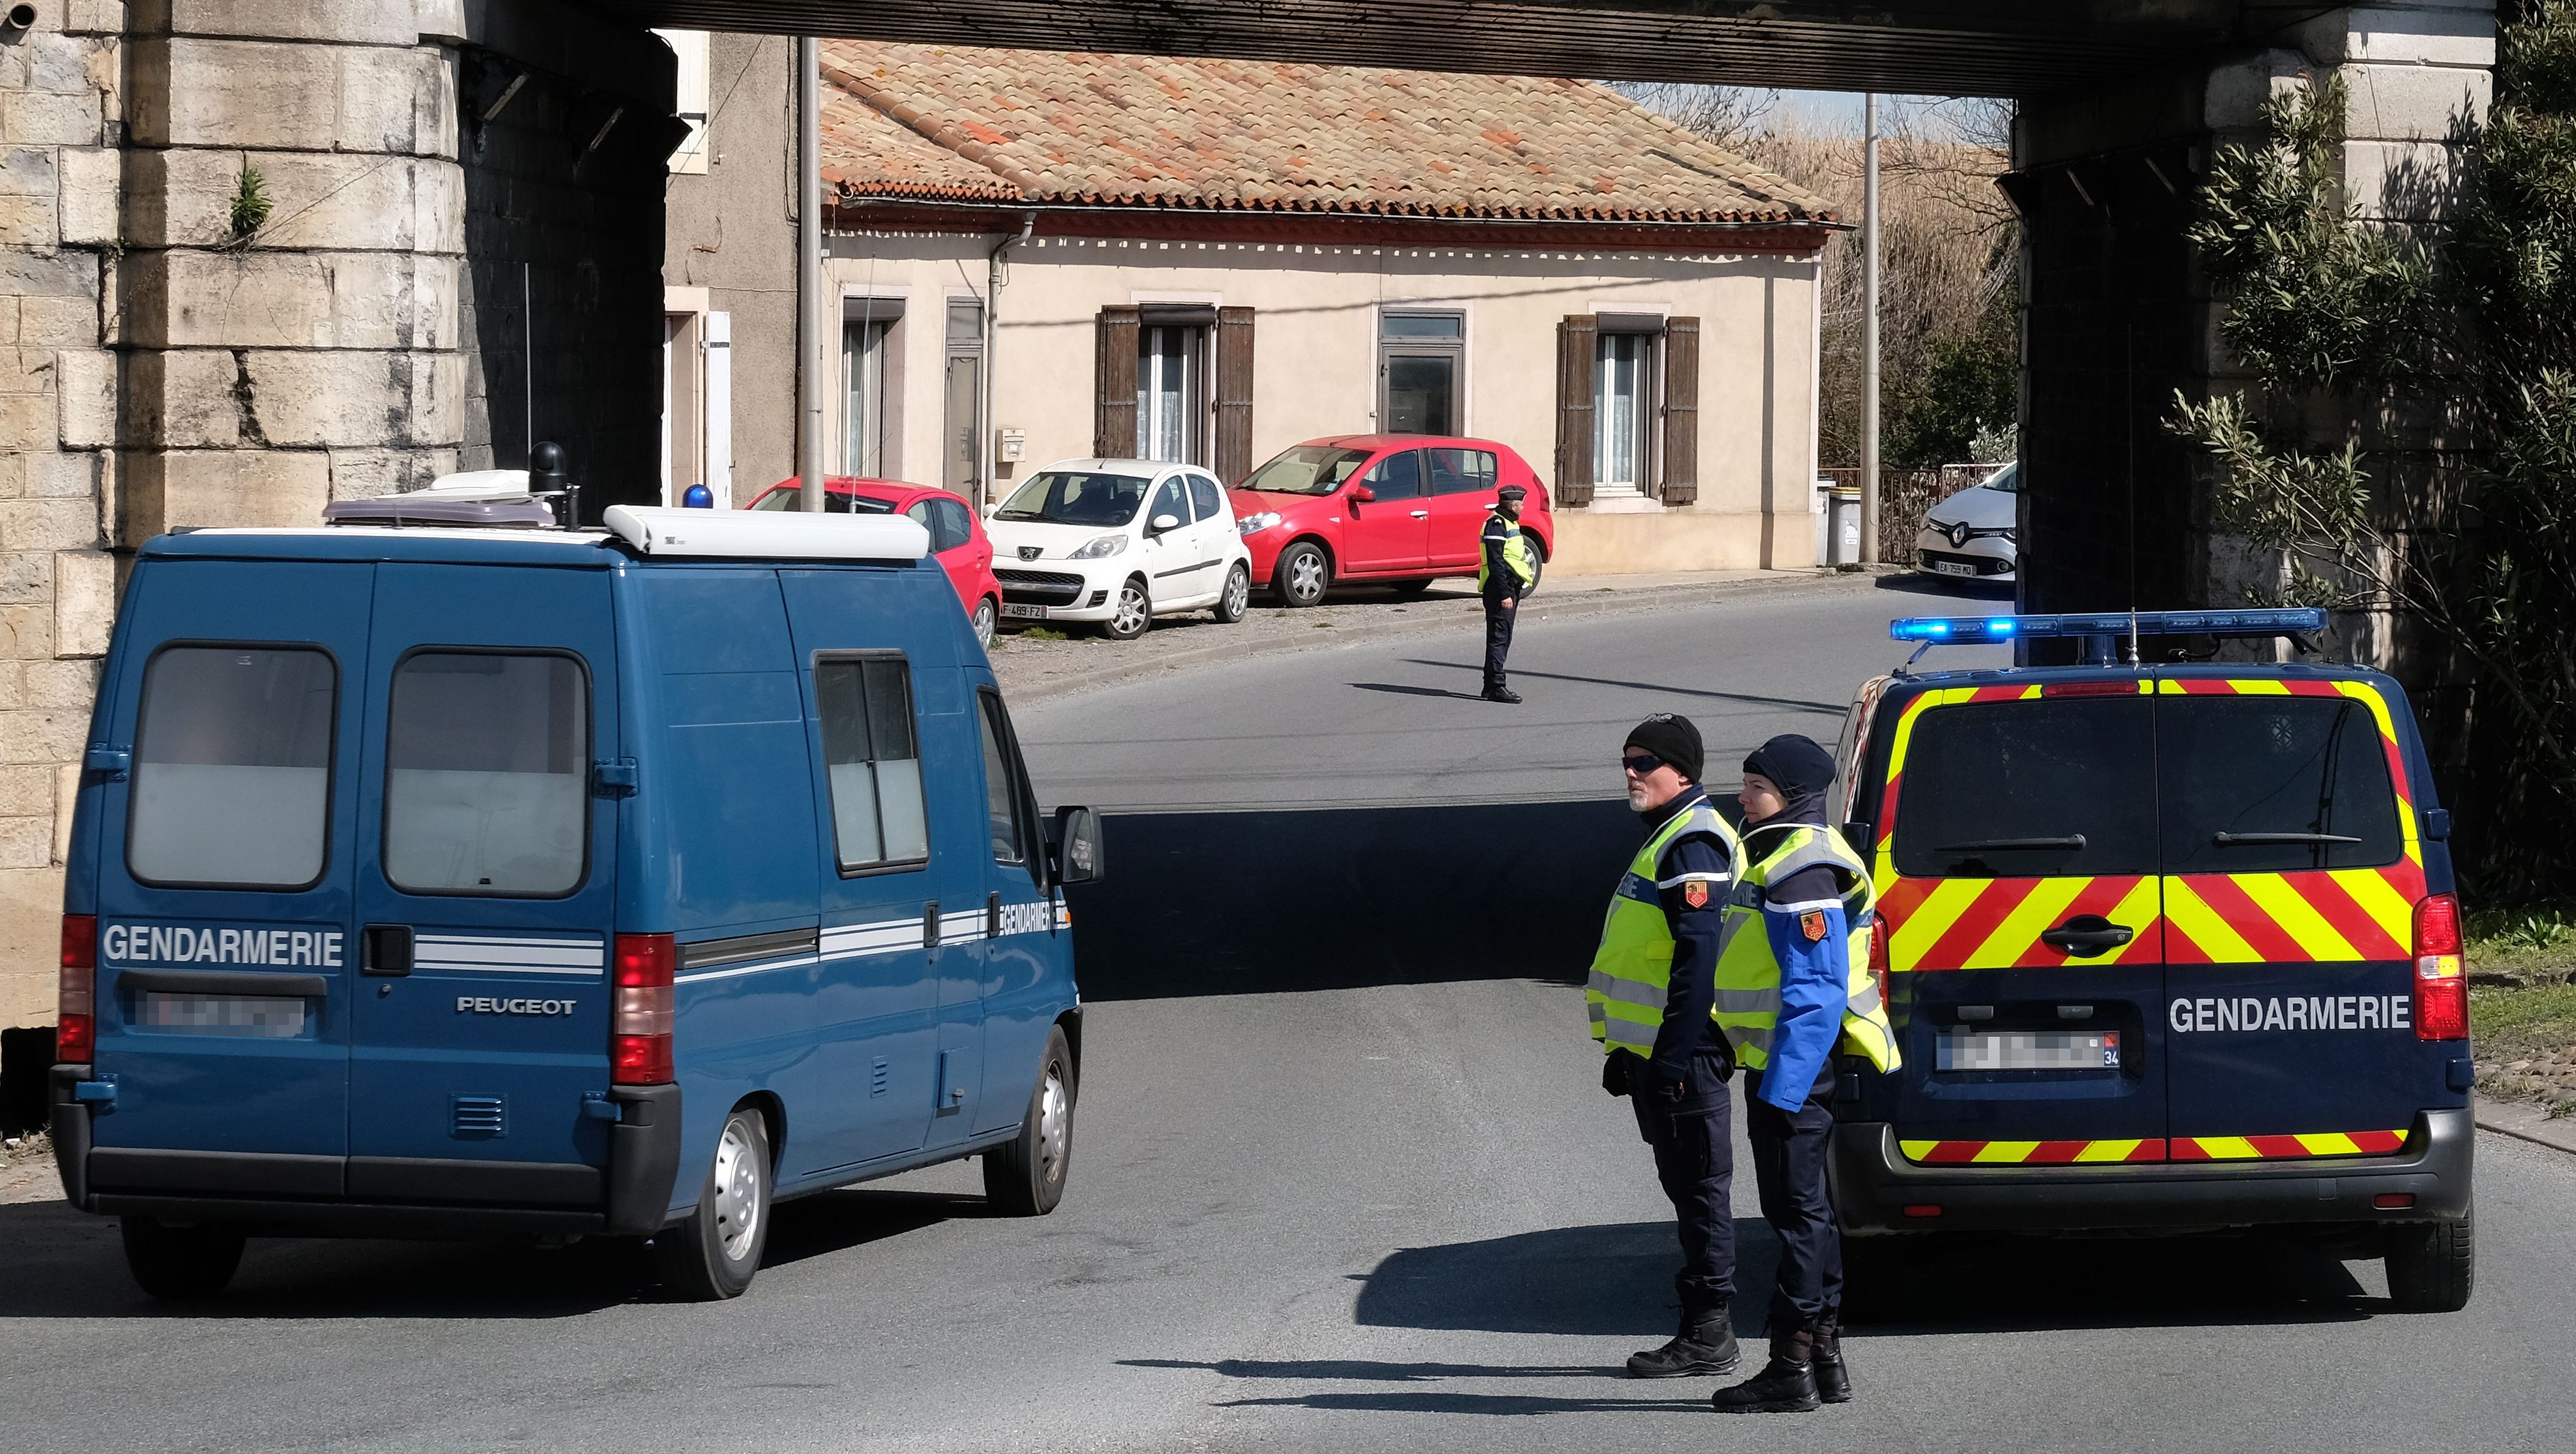 gunman dead after taking hostages in french supermarket reports